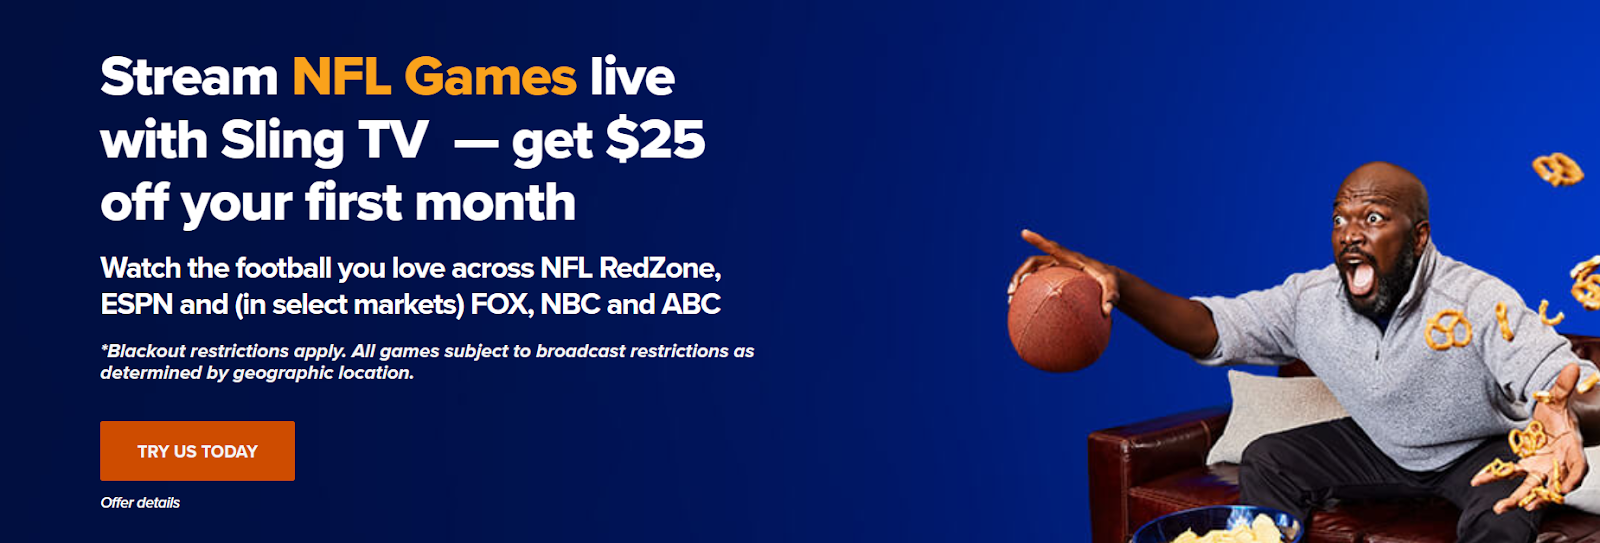 Sling TV has live NFL football with the RedZone, ESPN, and in some markets on FOX, NBC, and ABC
